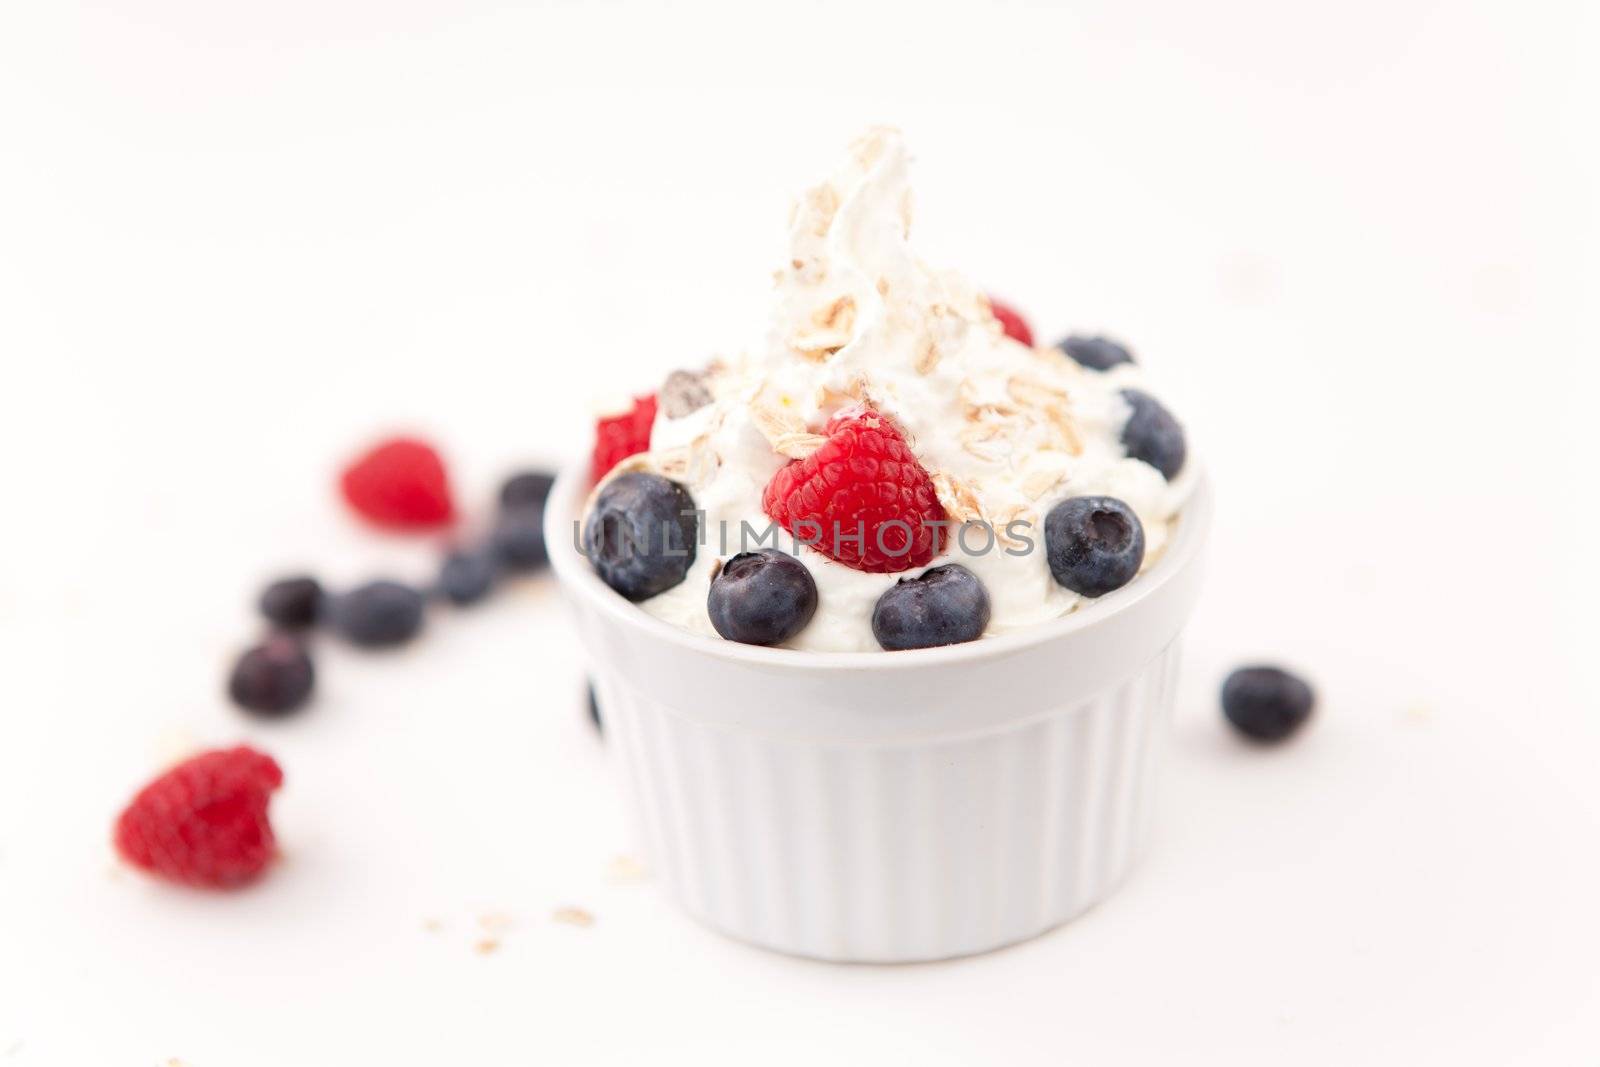 Jar of whipped cream and berries against white background